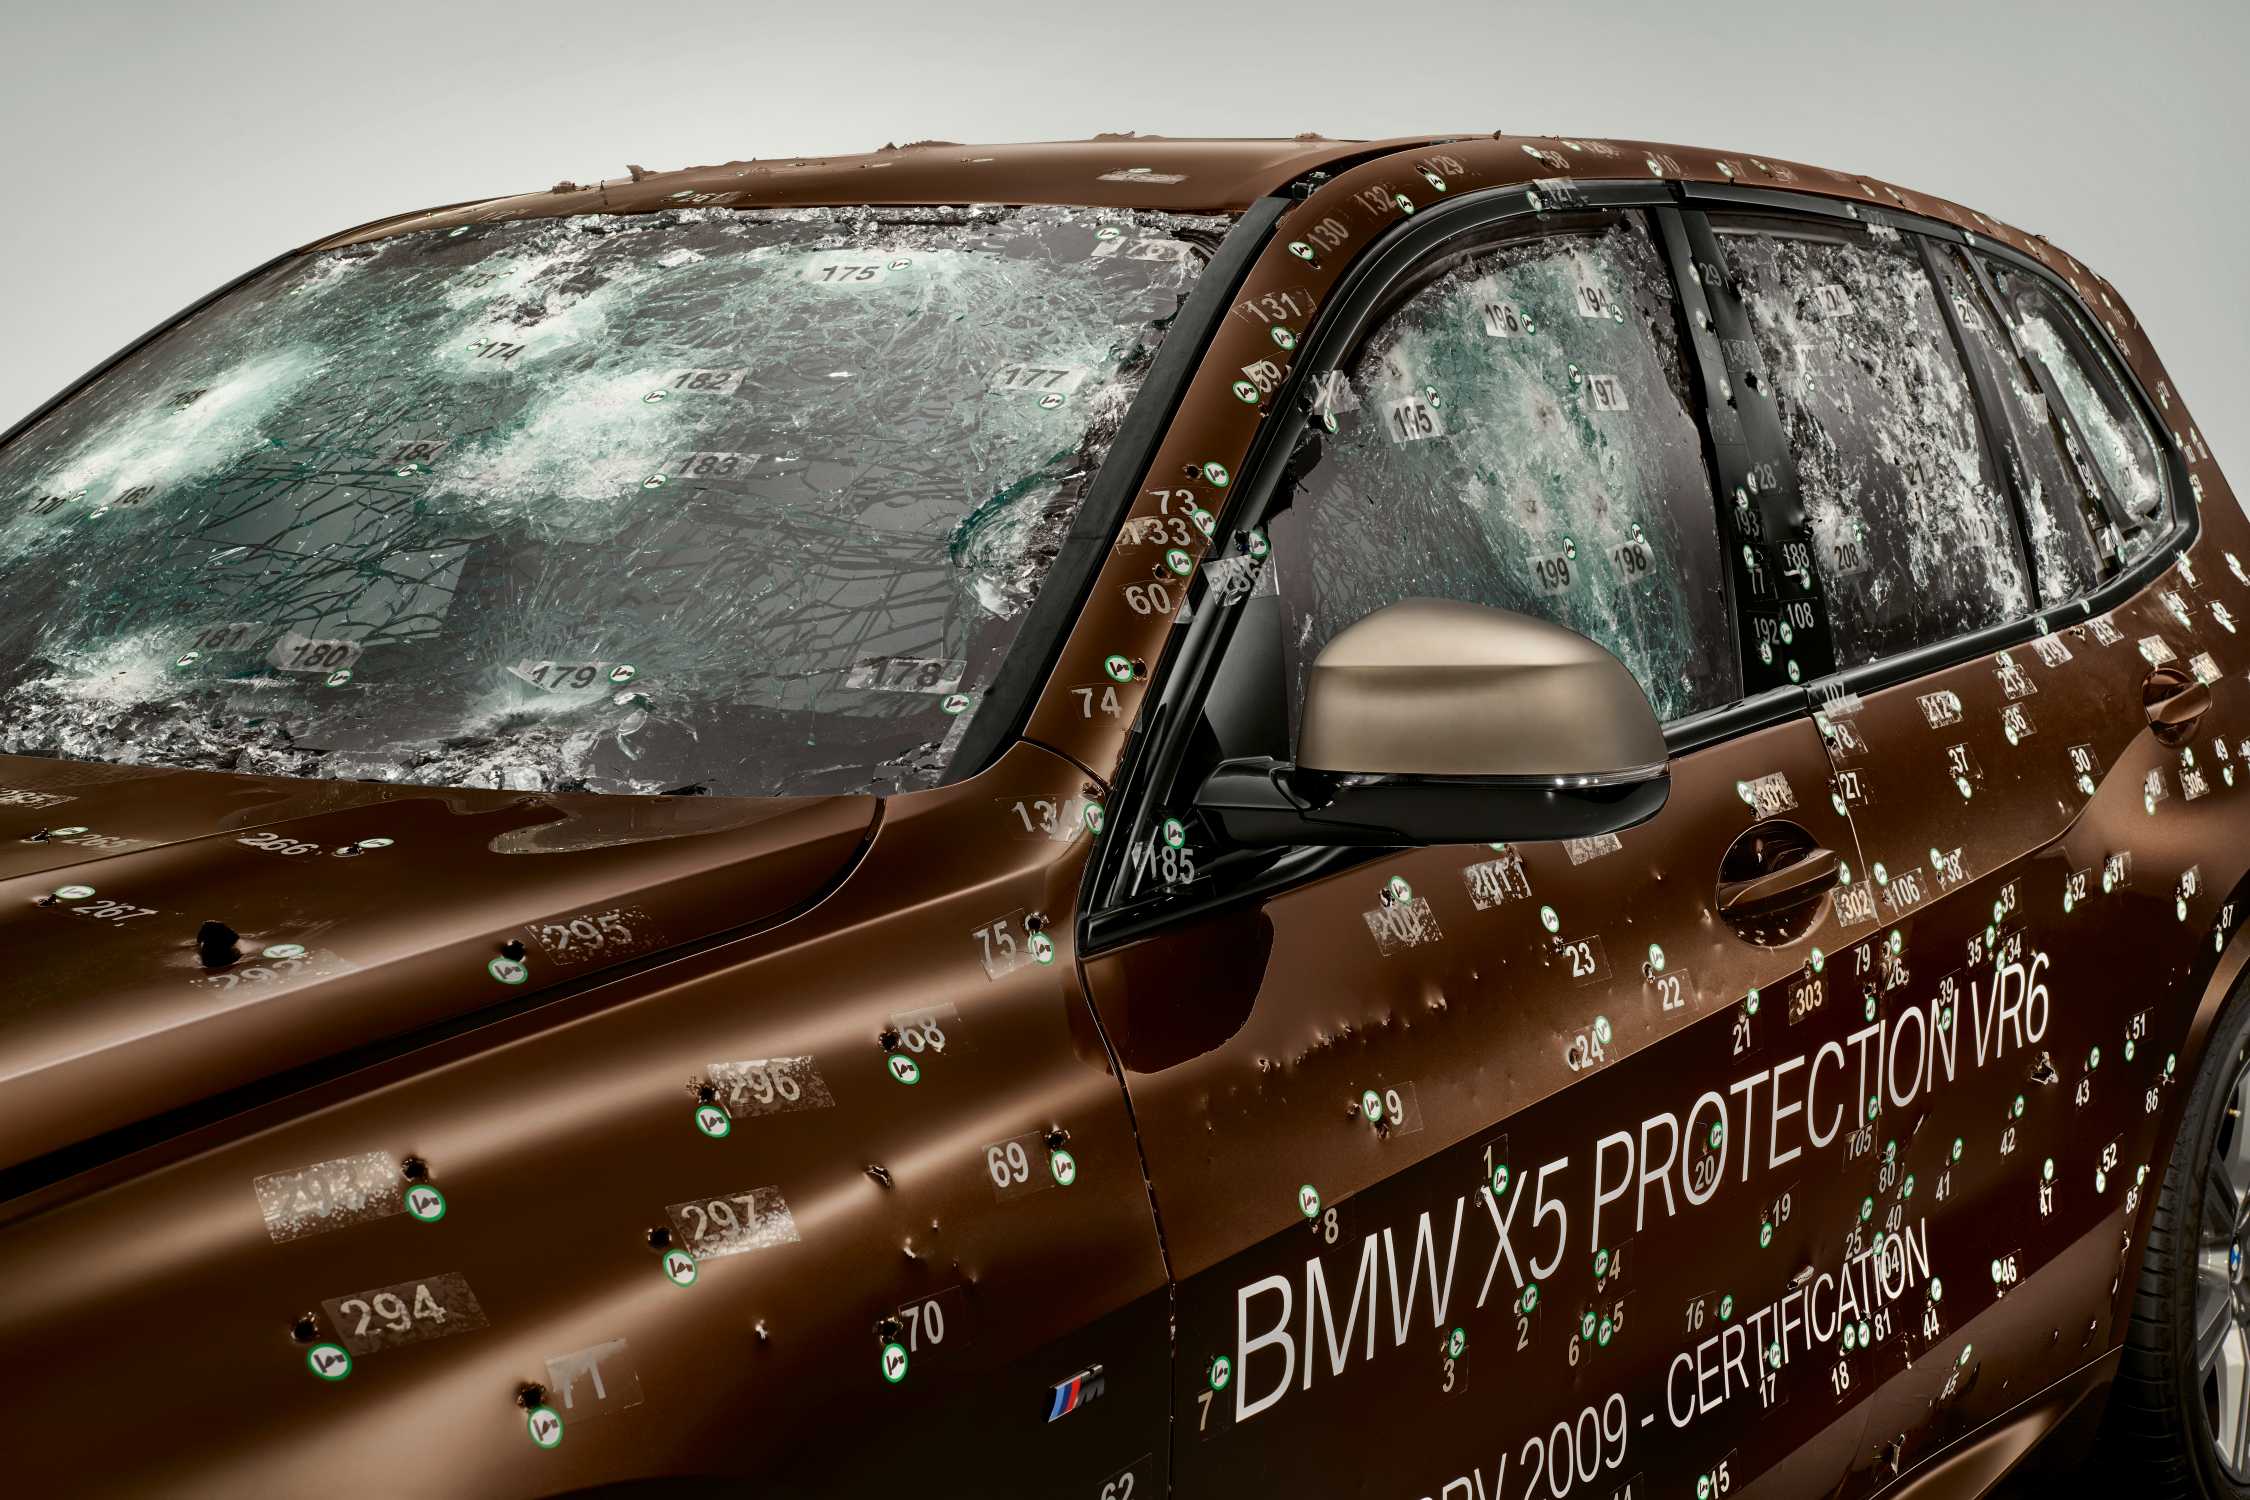 The new BMW X5 Protection VR6 - Certification (08/2019).